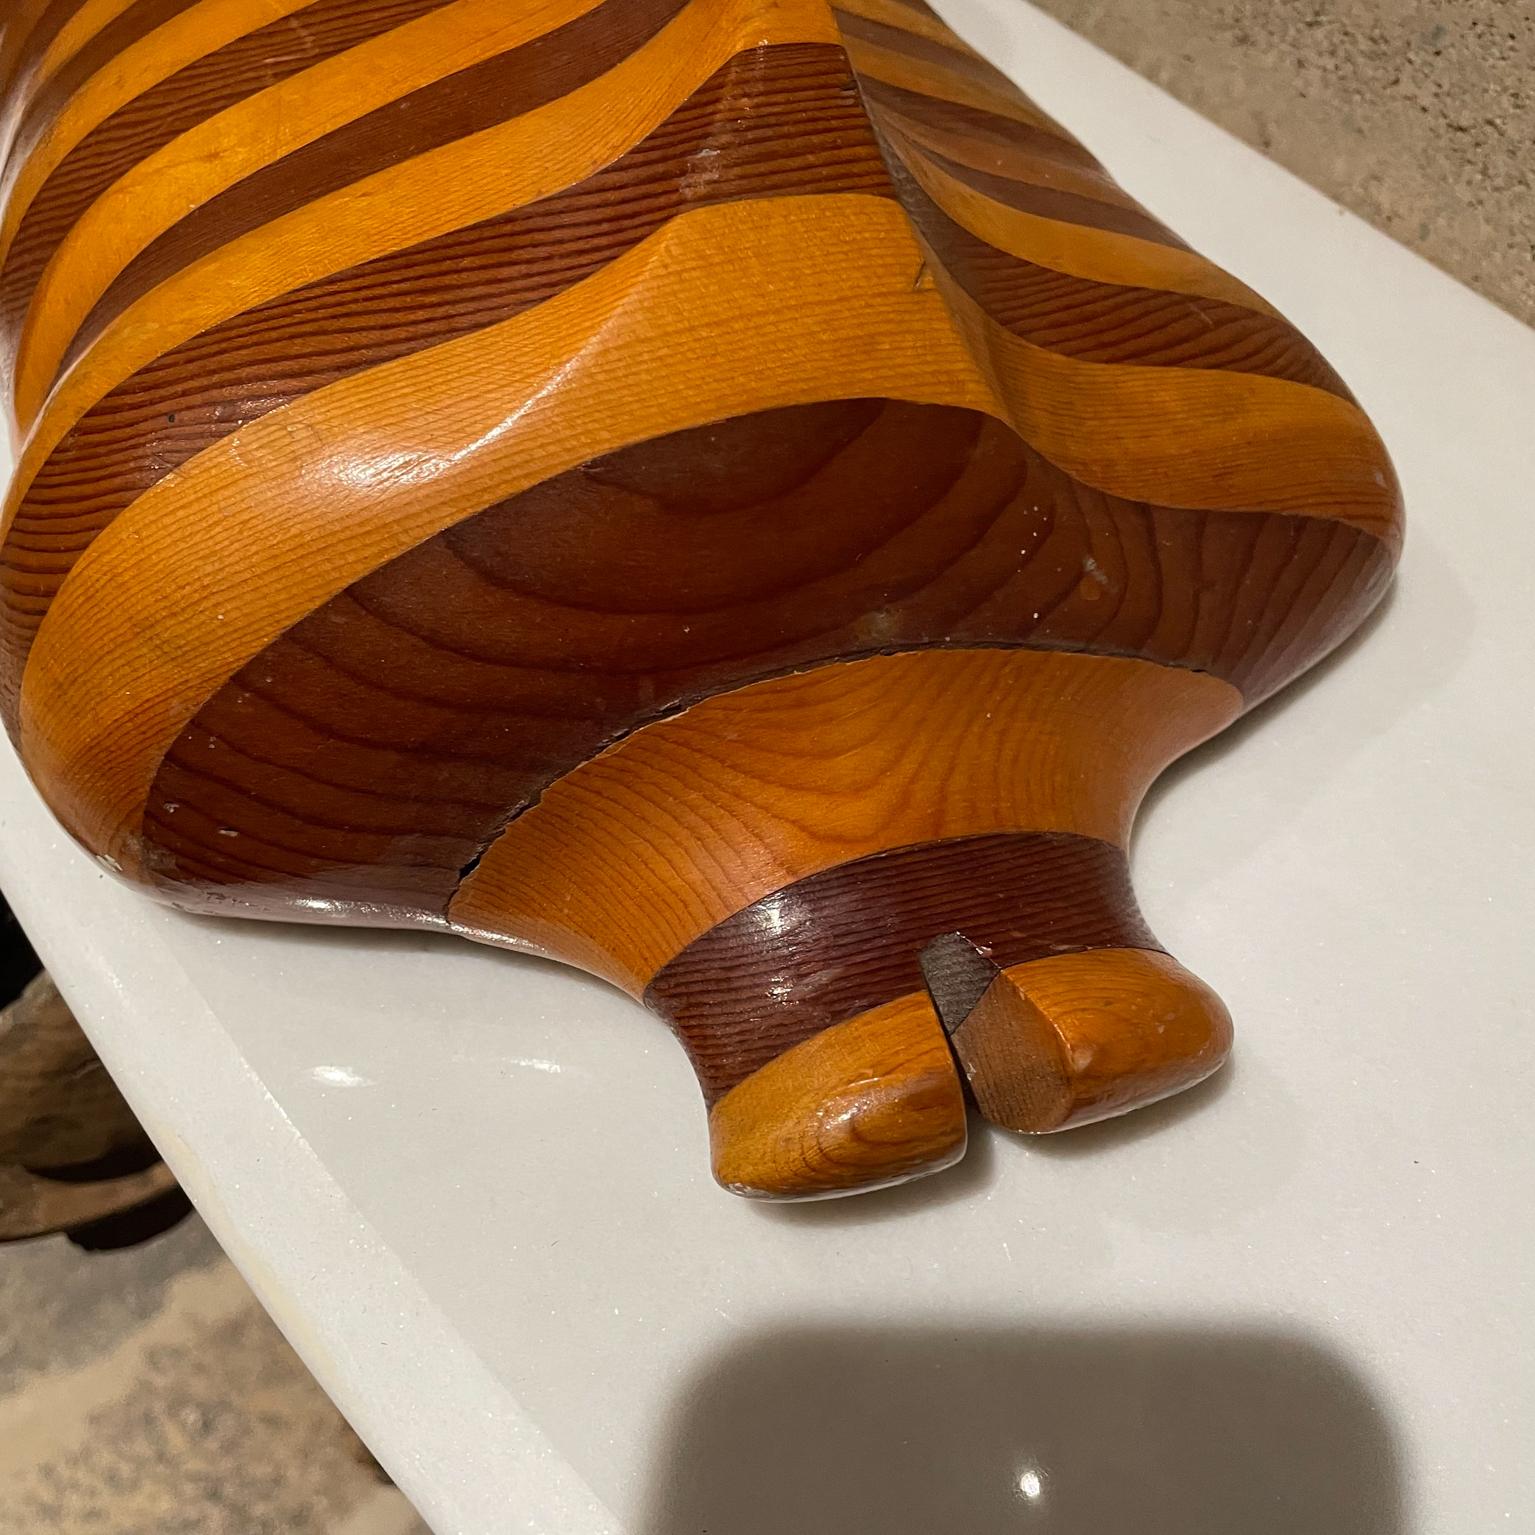 1970s Abstract Organic Modern Table Sculpture Free Form in Striped Exotic Wood  For Sale 2